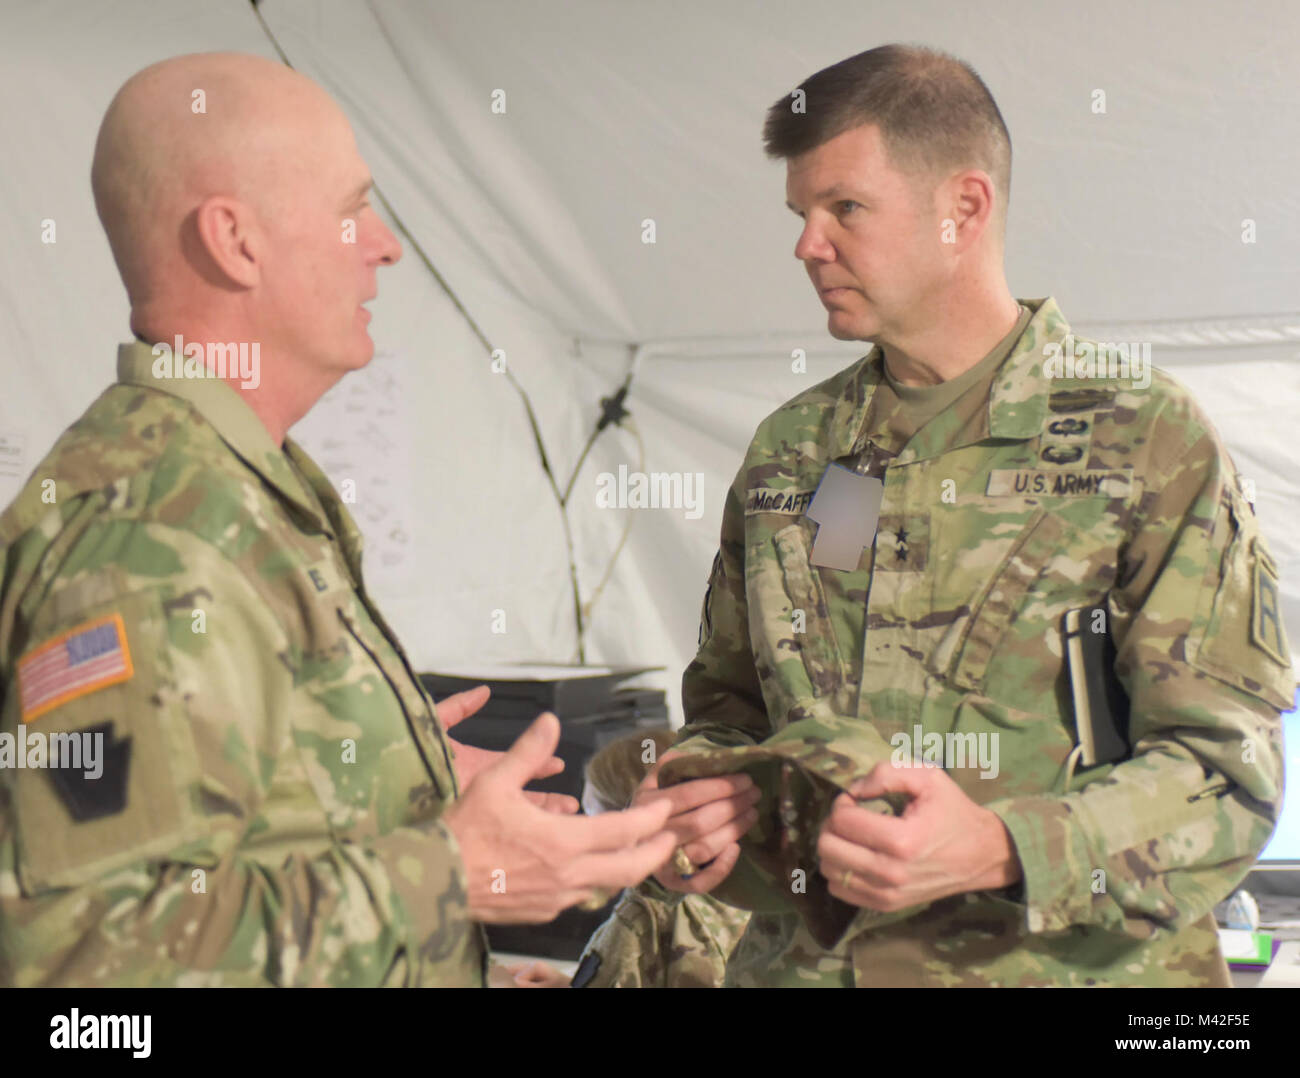 Maj. Gen. Todd McCaffrey (right), First Army Division East commanding general, talks with Command Sgt. Maj. John Jones, command sergeant major of the Pennsylvania Army National Guard's 28th Infantry Division, during the 28th ID's culminating training exercise at Fort Hood, Texas, Jan. 31, 2018. About 500 Soldiers in the Pennsylvania unit's headquarters are preparing to deploy to the Middle East. “(First Army personnel) have been very helpful assisting us on our way to deployment and with the validation process,” Jones said. ( Stock Photo